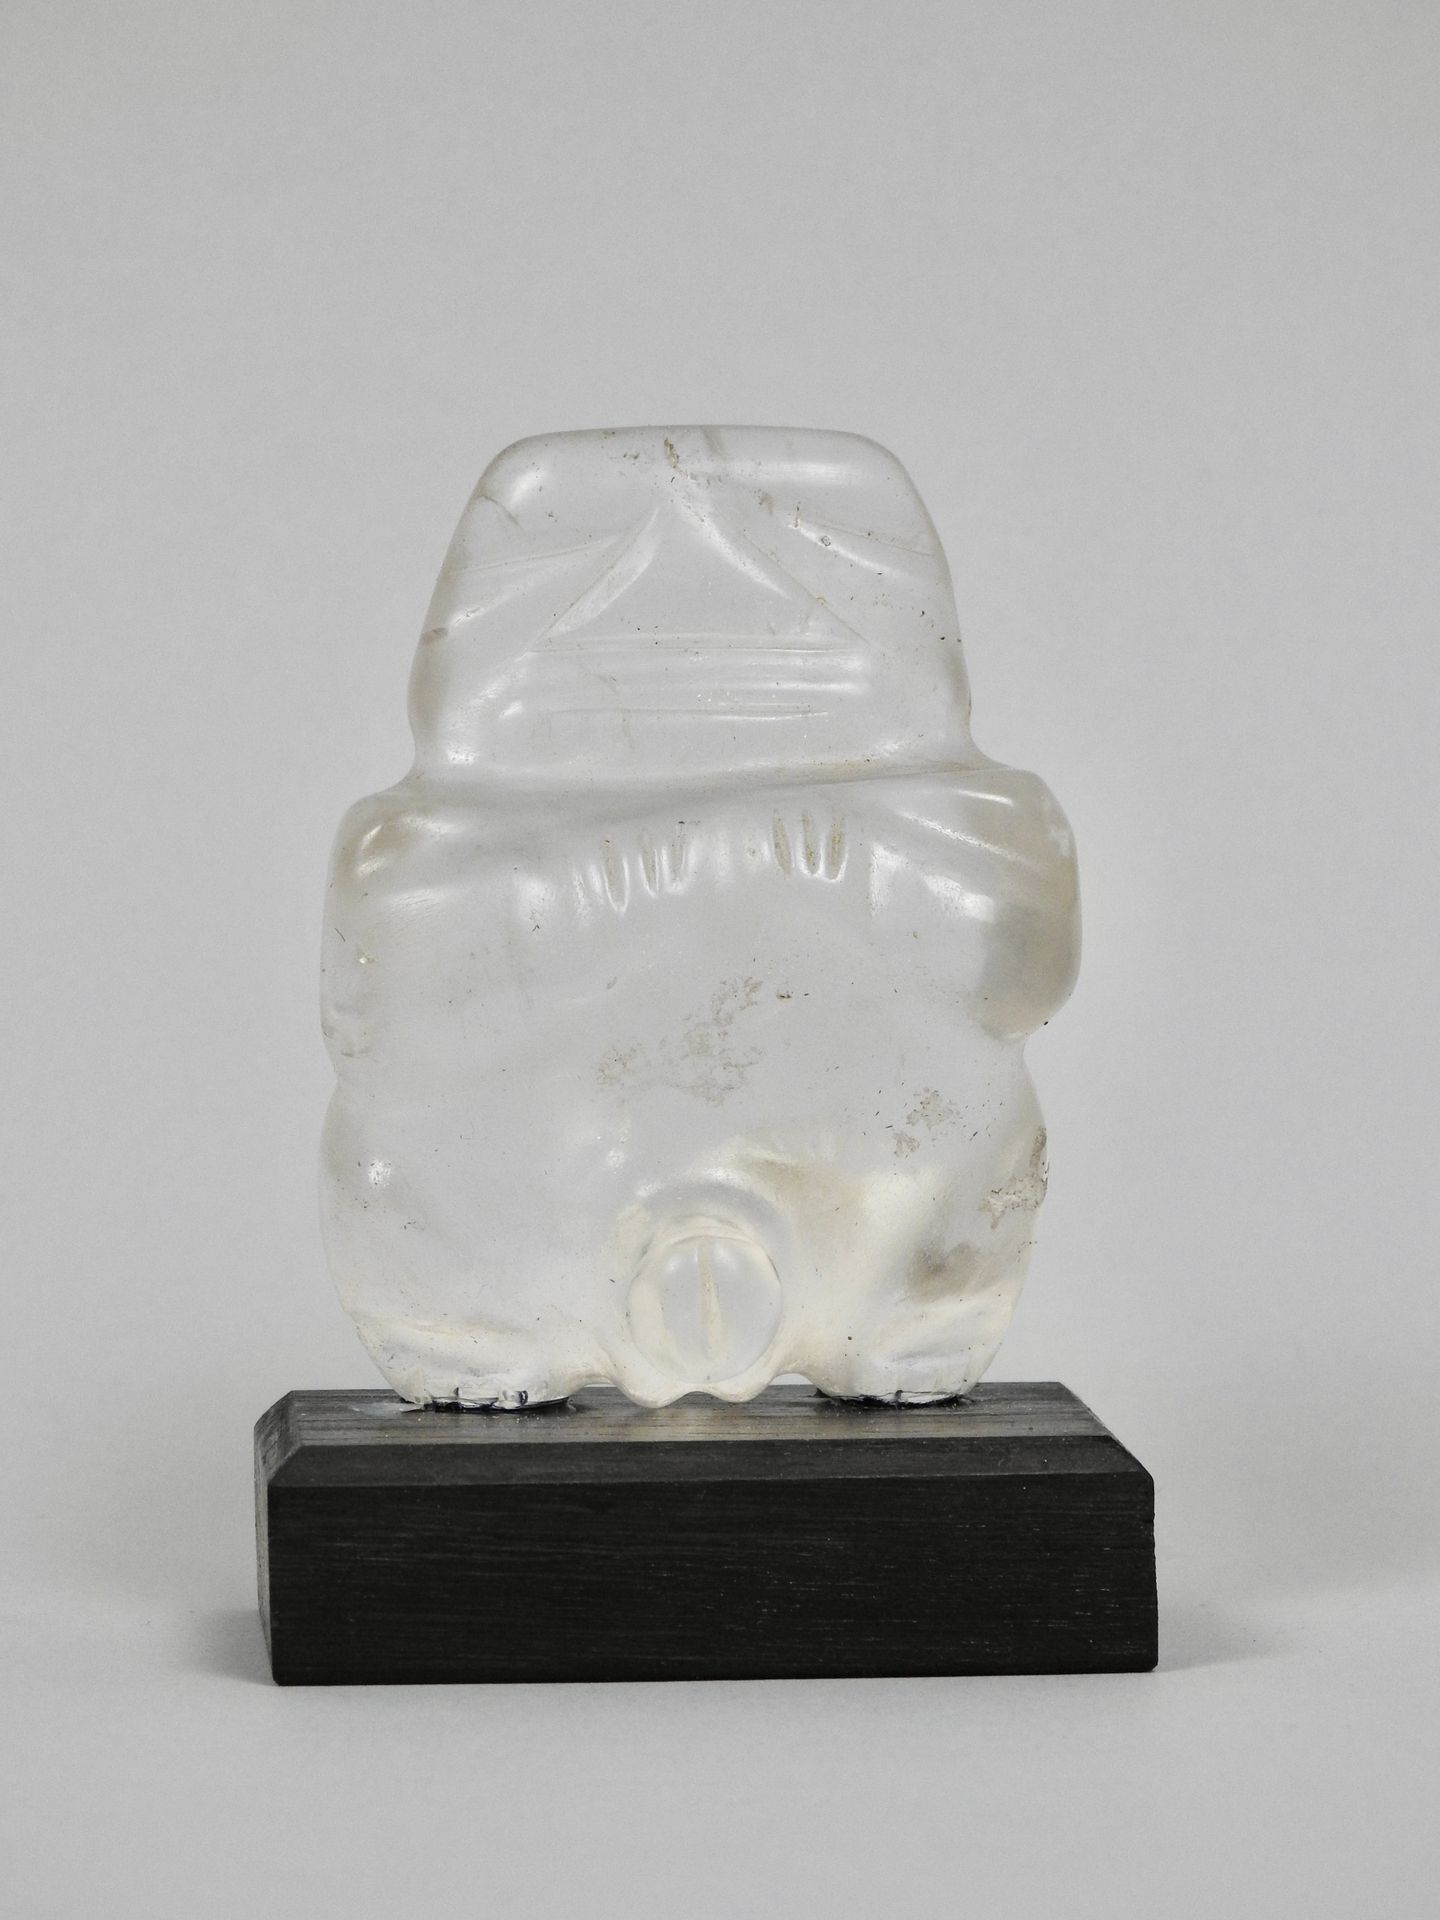 Null Calima or later culture Male fertility idol Hyaline rock crystal

H 8,5 cm